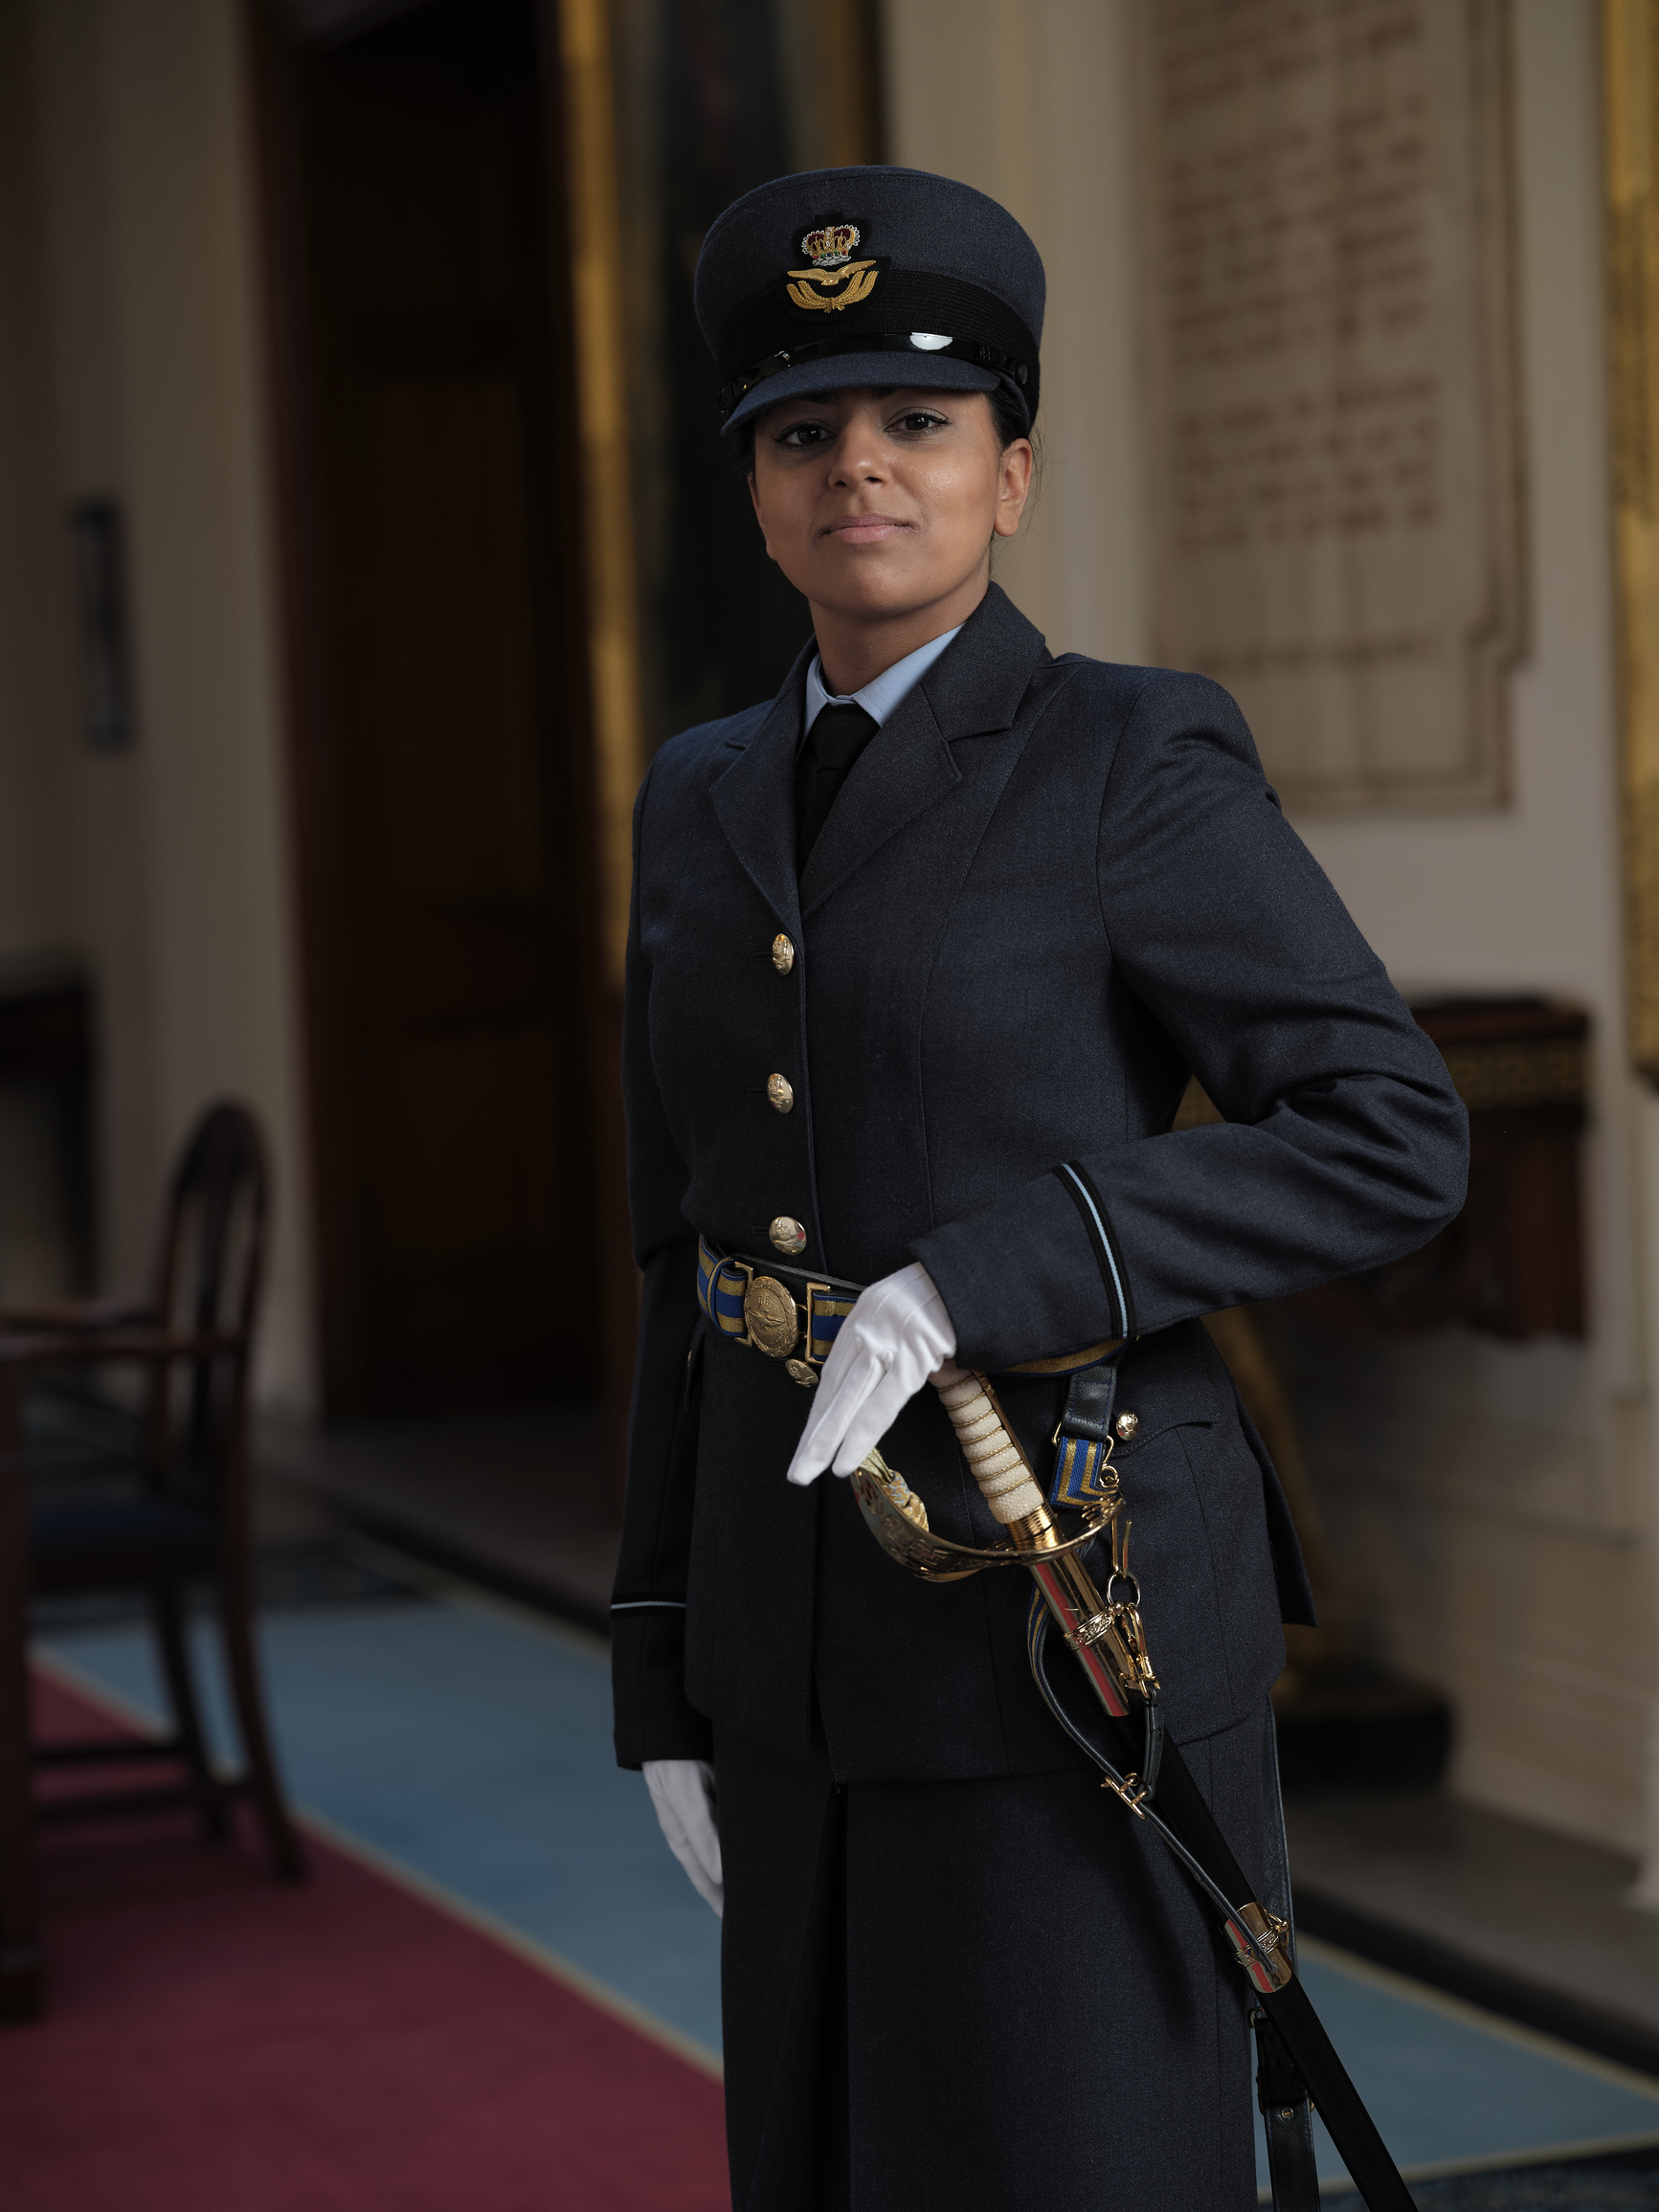 Image shows RAF aviator in uniform for official portrait.